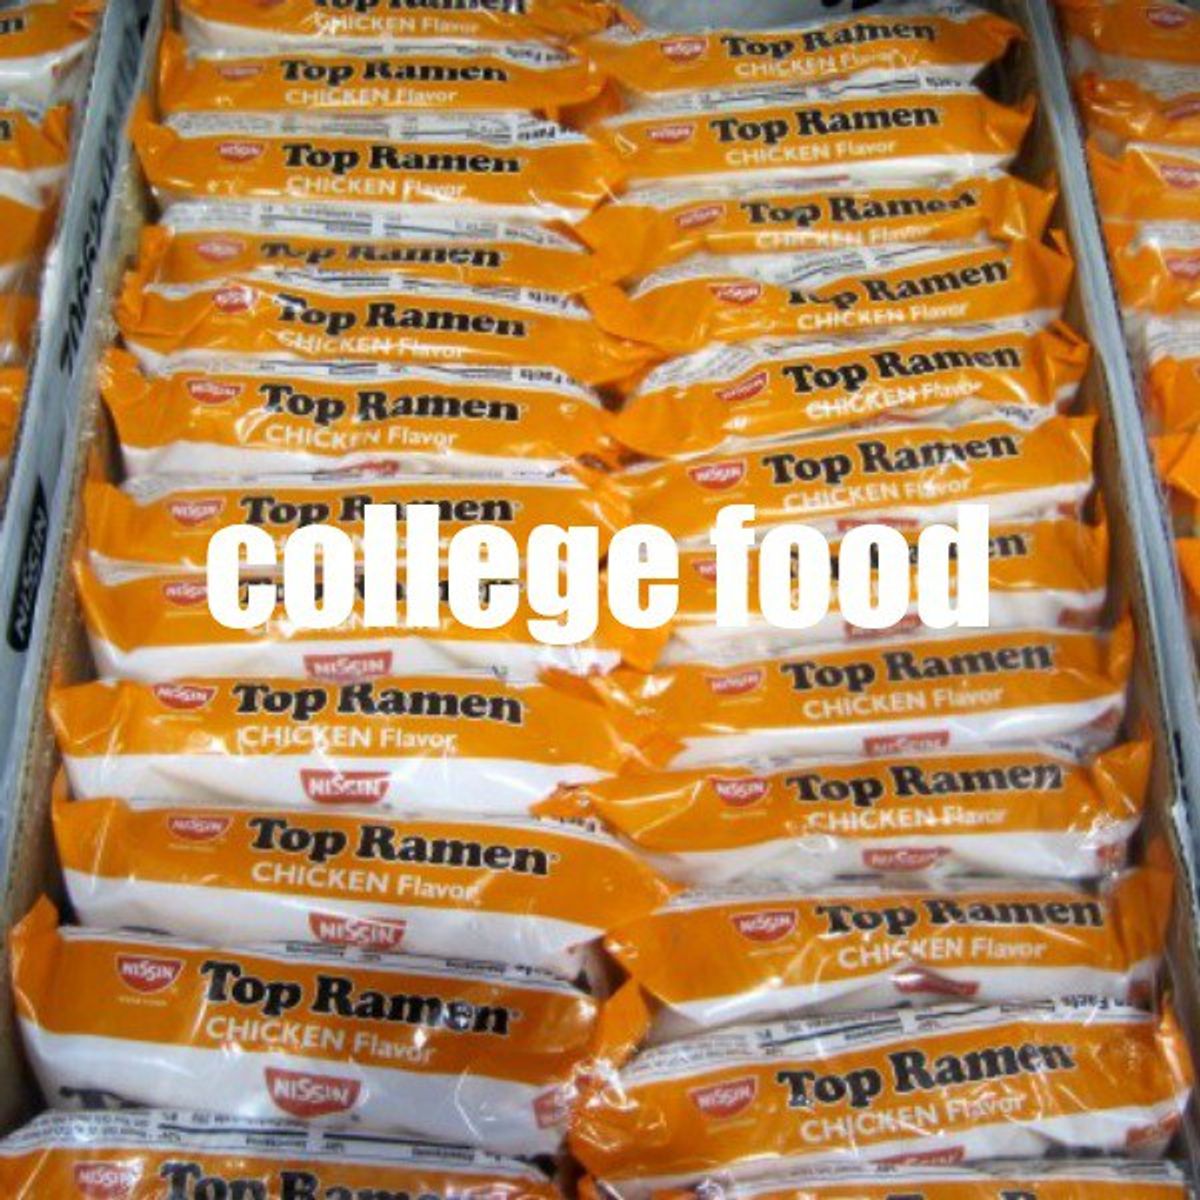 12 Typical College "Meals"